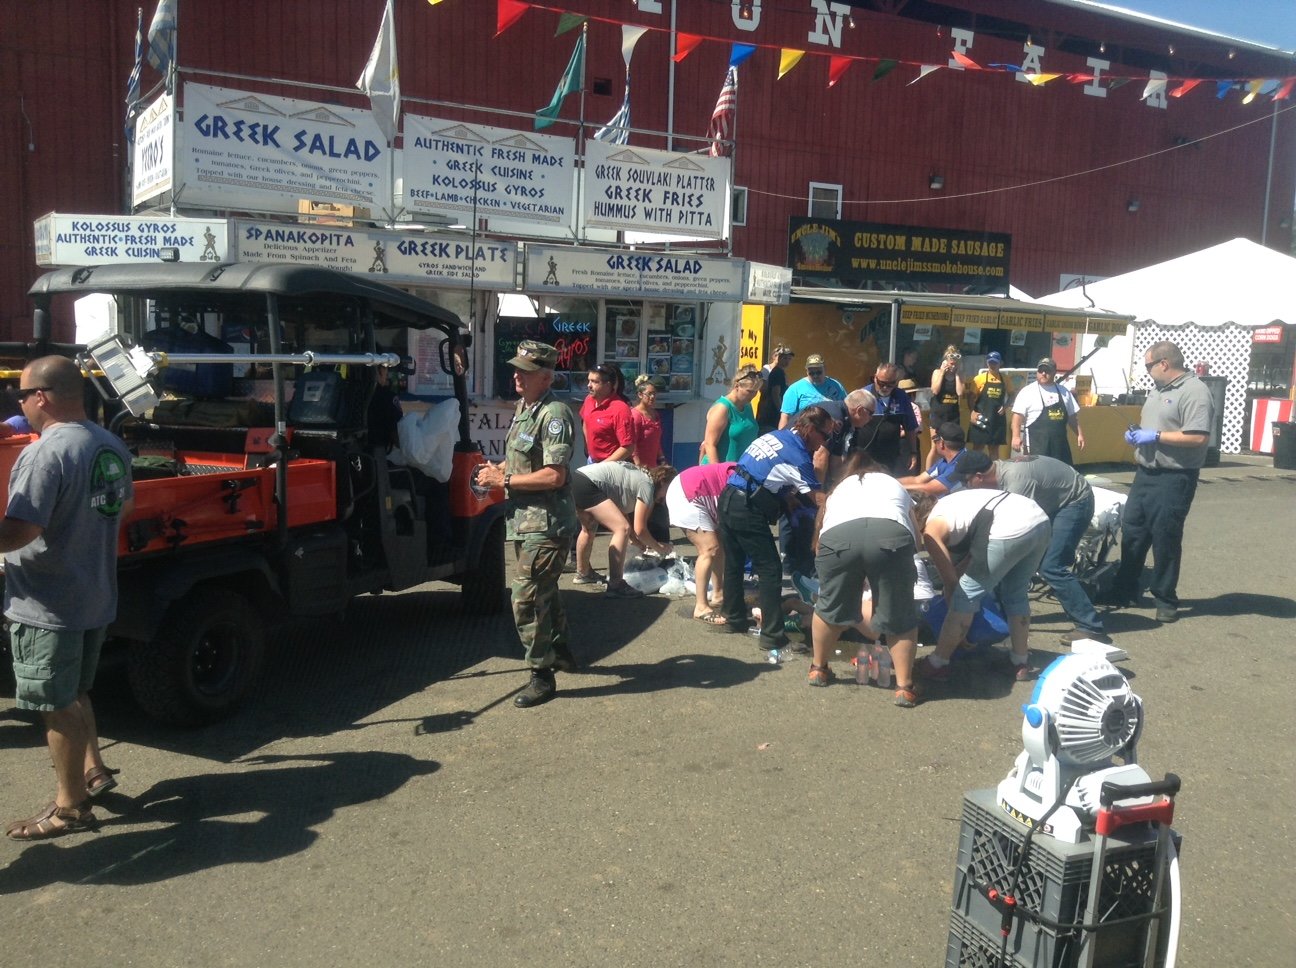 Five people were injured at the 2016 Southwest Washington Fair after a horse became startled and bolted down the midway, according to the Riverside Fire Authority.